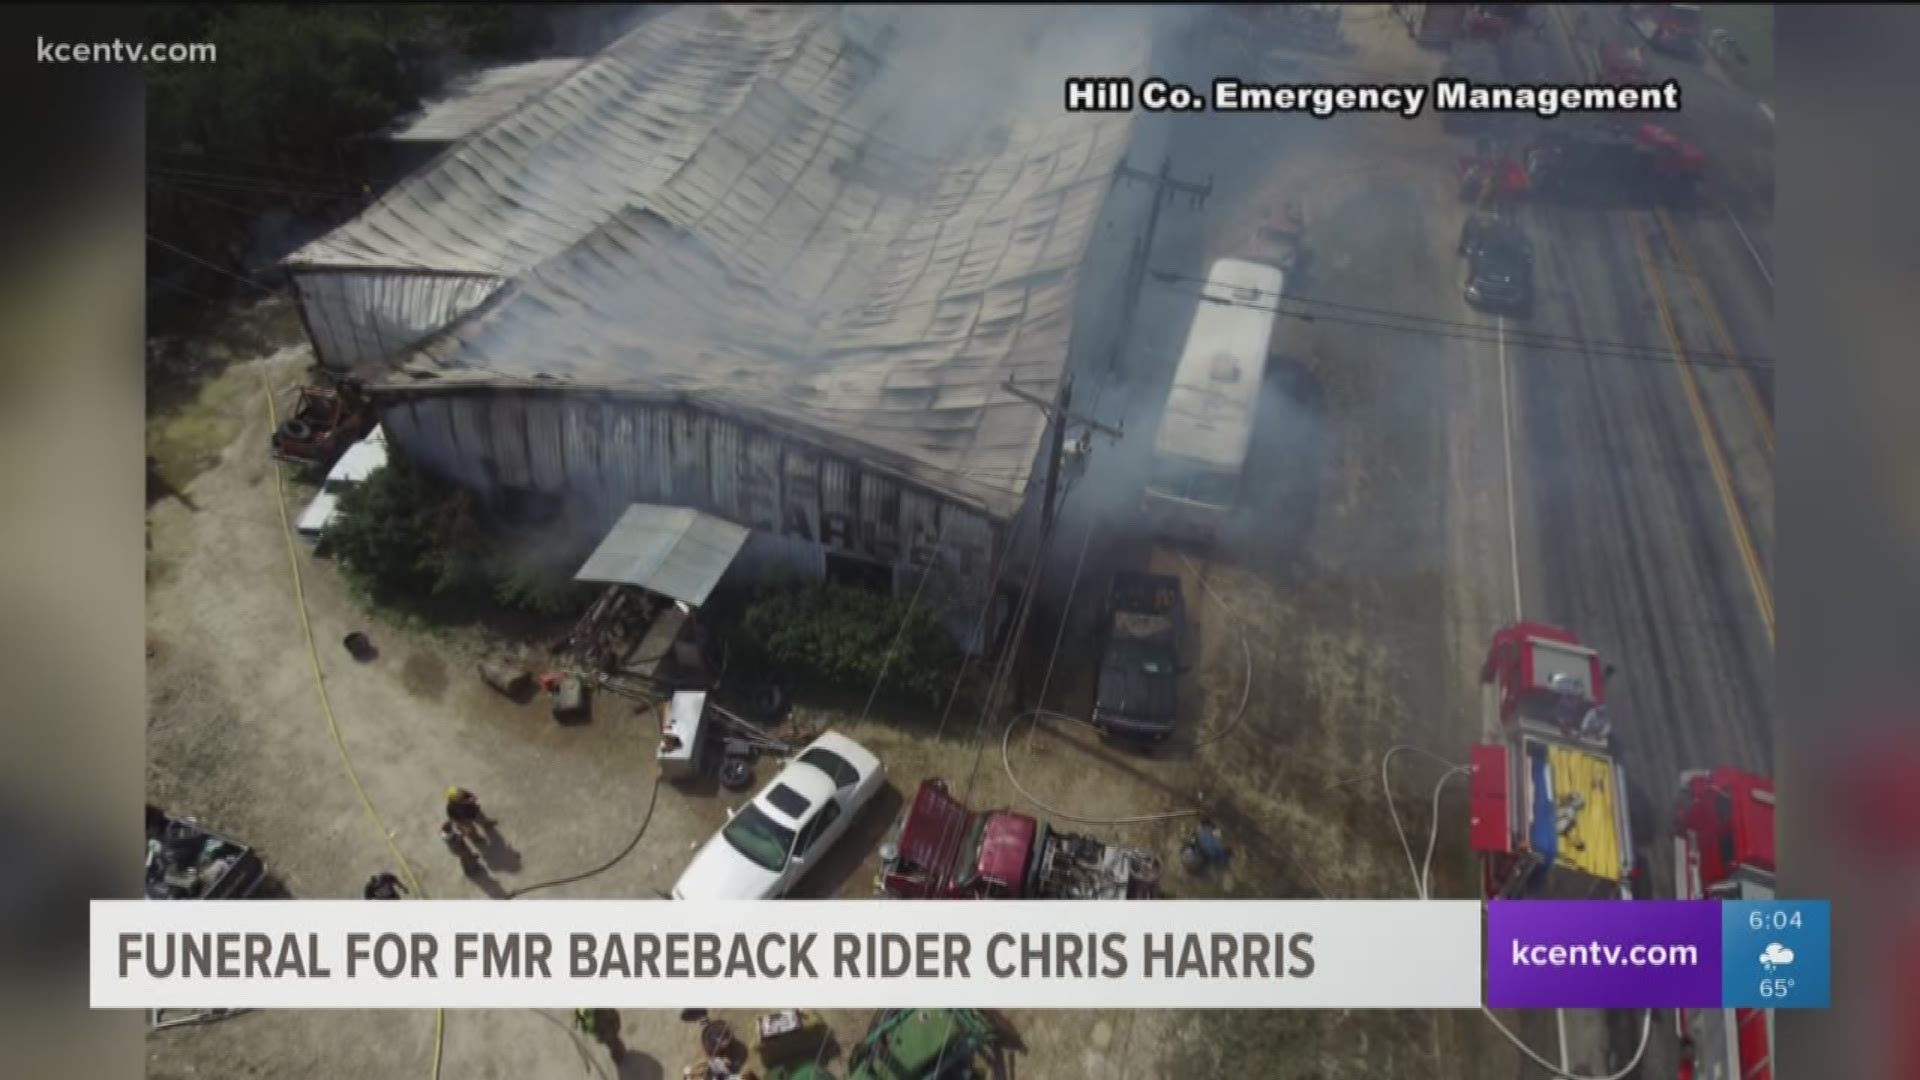 A funeral has been scheduled for a former professional bareback rider who died during a fire in Bosque County. 